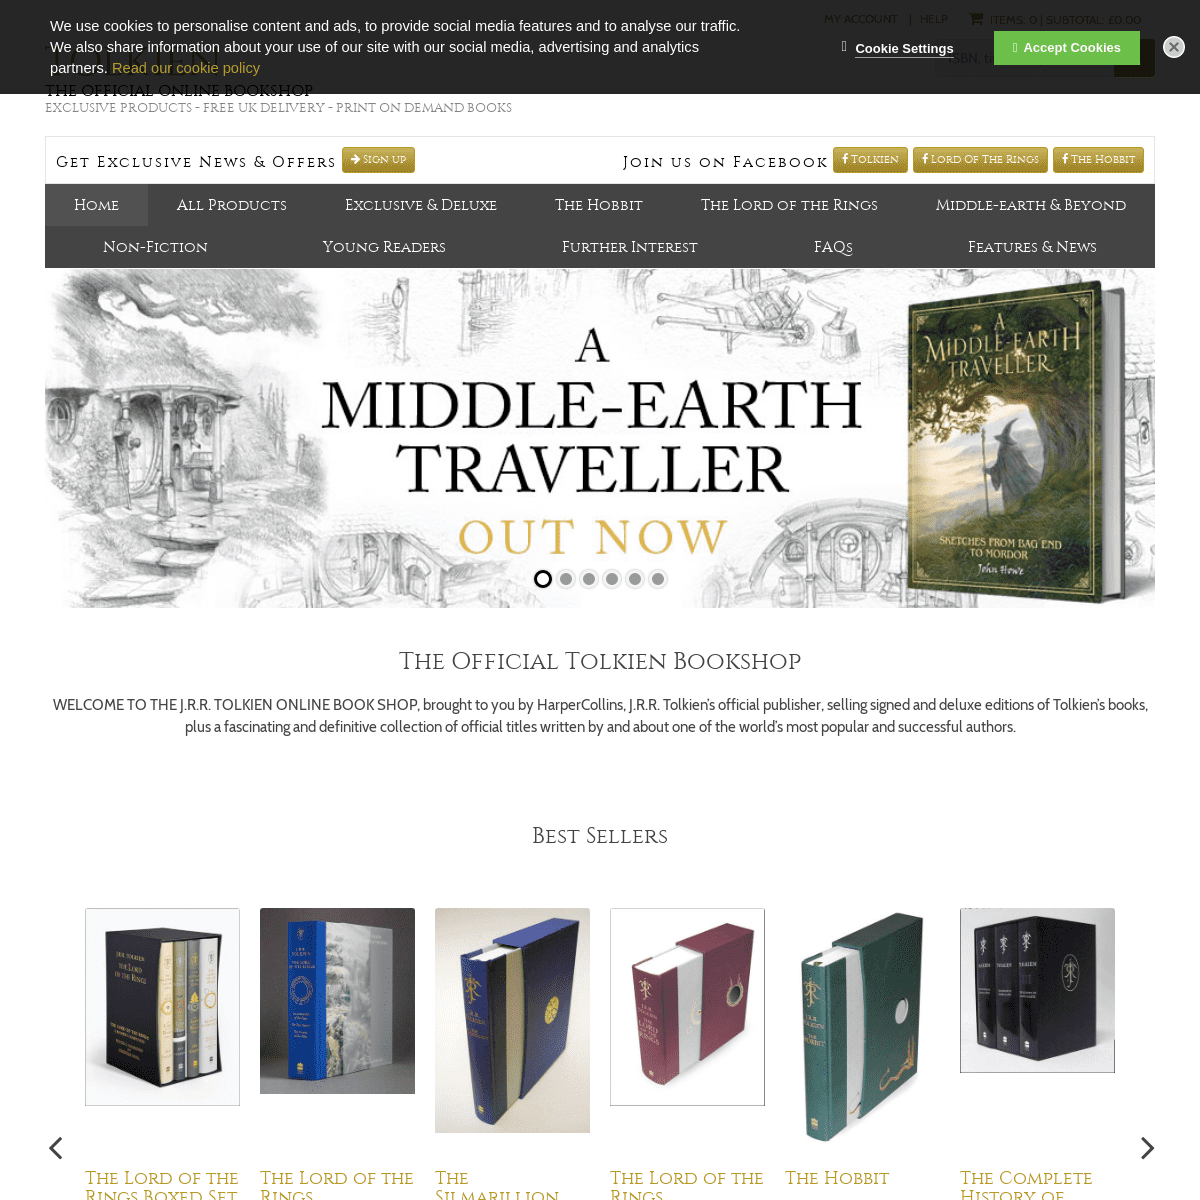 The Official J. R. R. Tolkien Book Shop